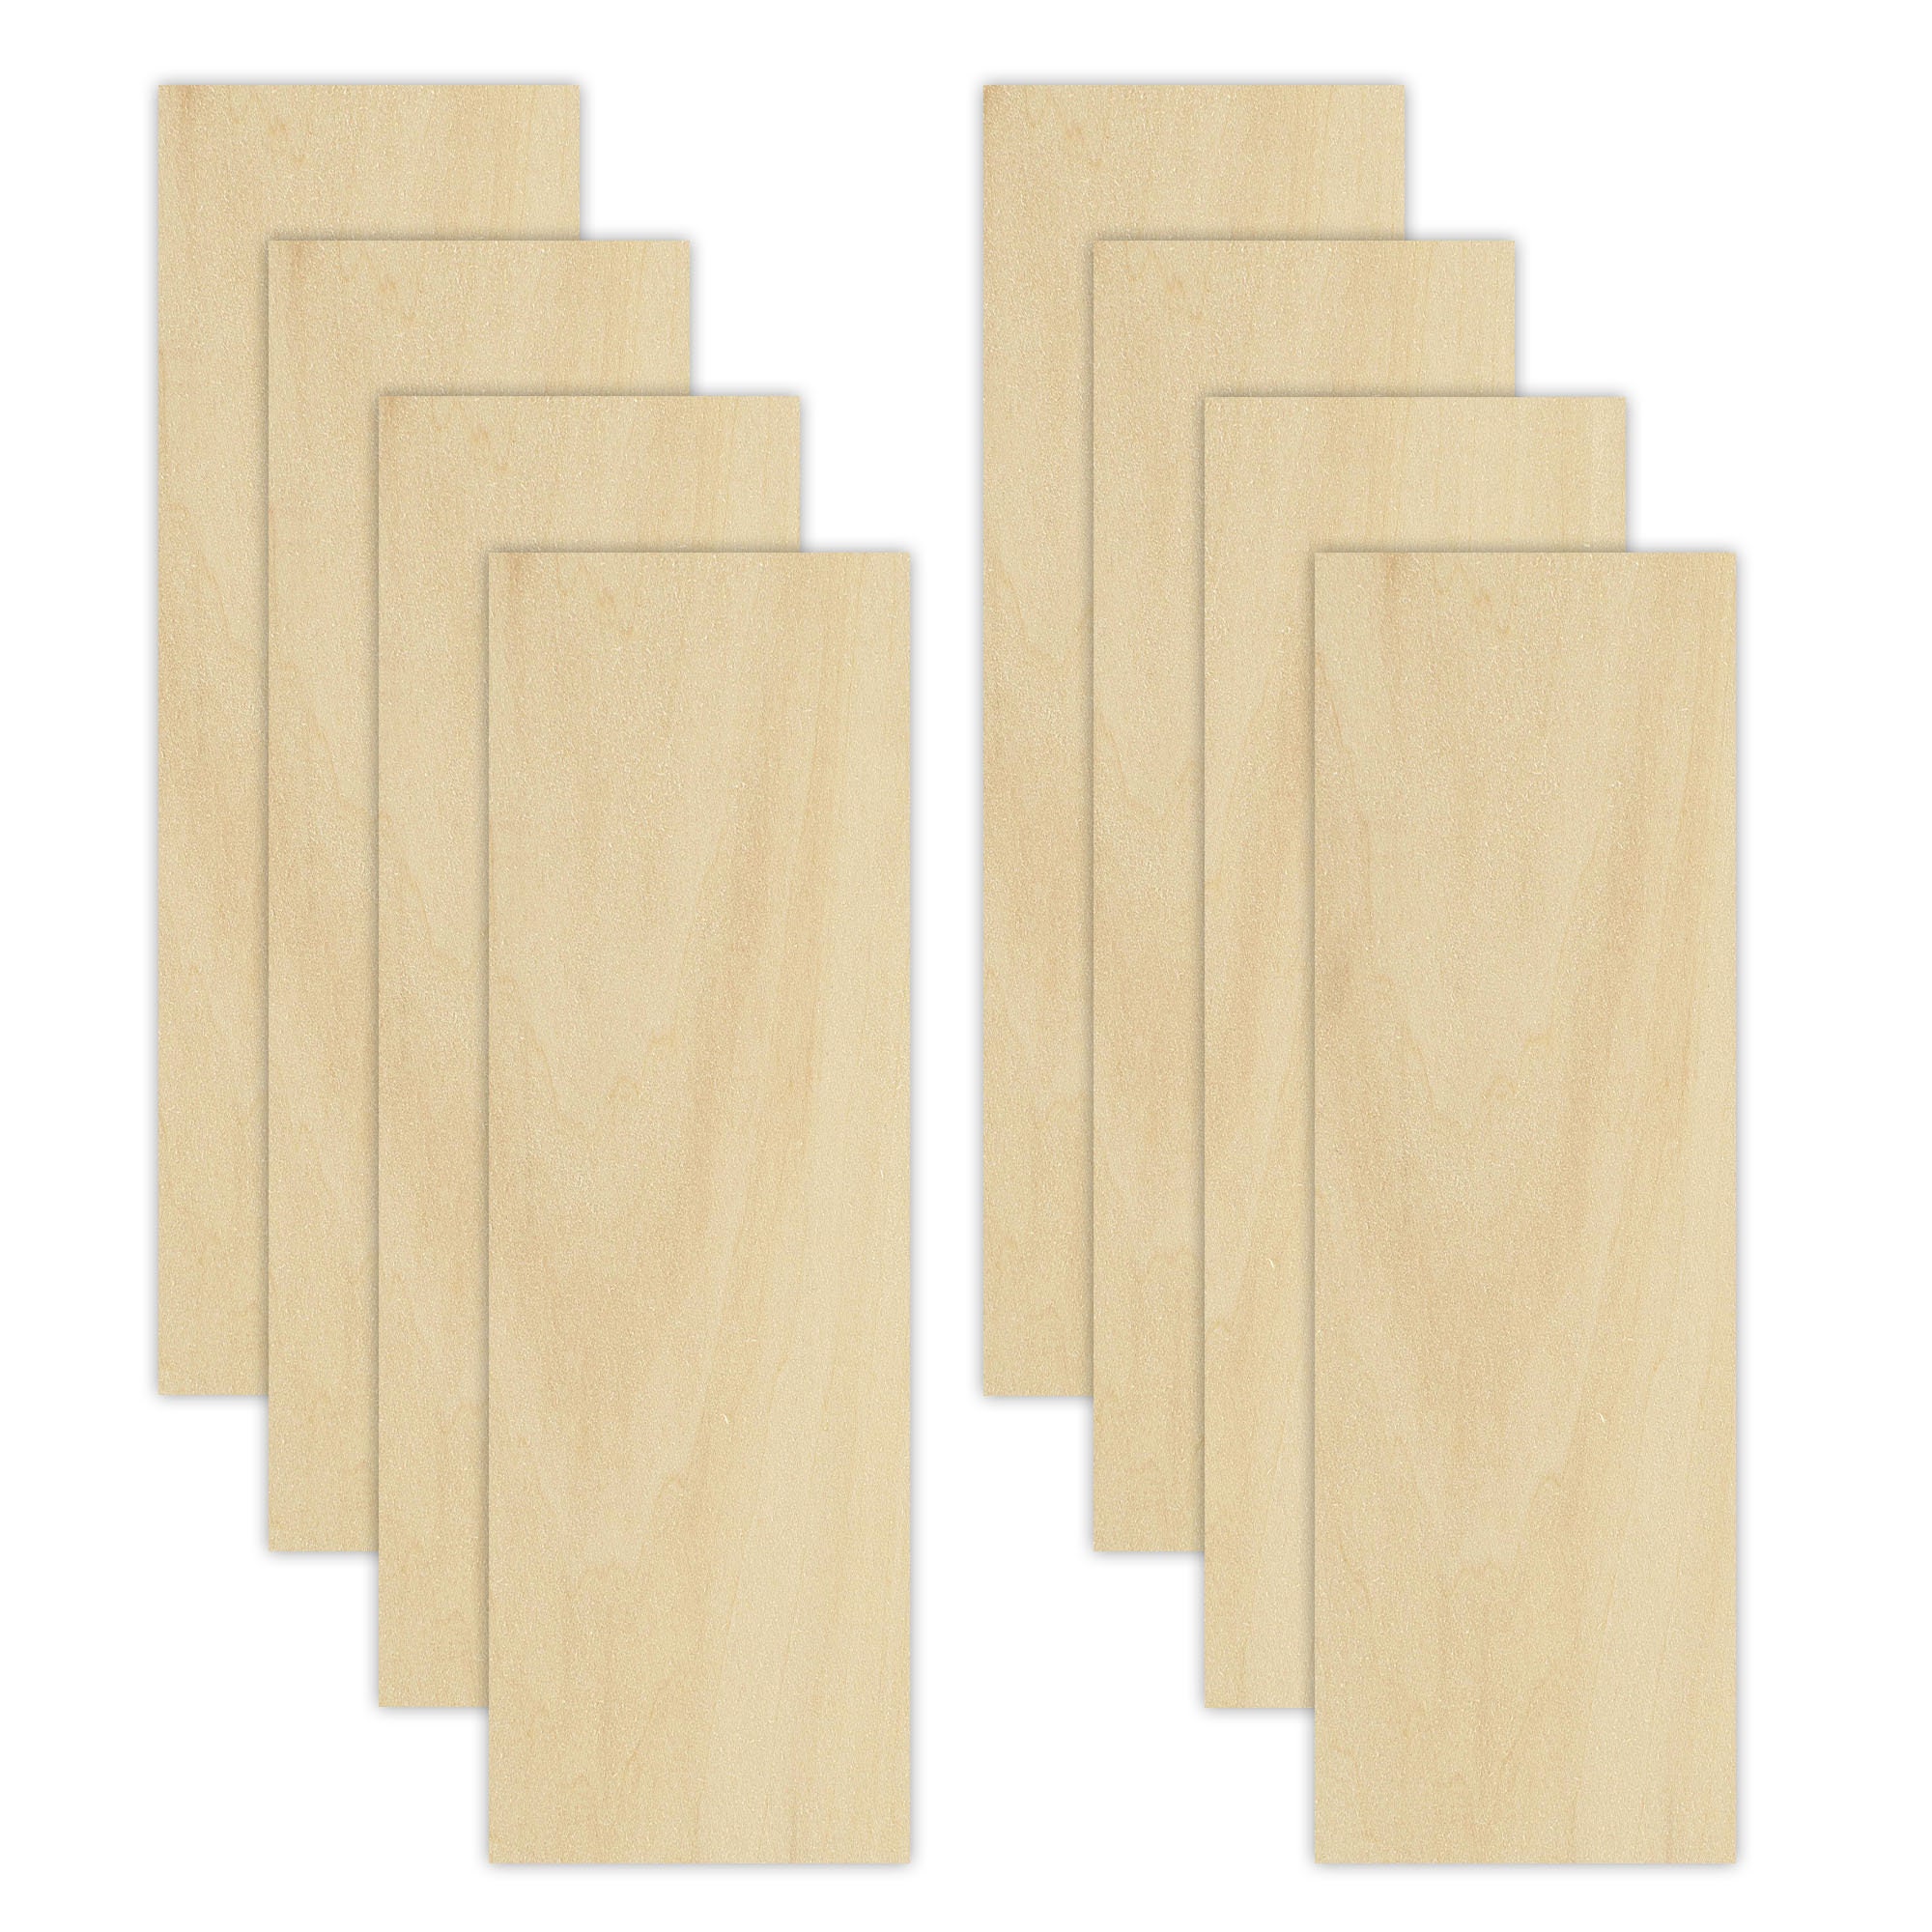 10PCS Plywood Basswood 300x300x3mm Lightweight Craft Board Unfinished Thin  Wood Sheets for Laser Cutting Engraving DIY Modeling